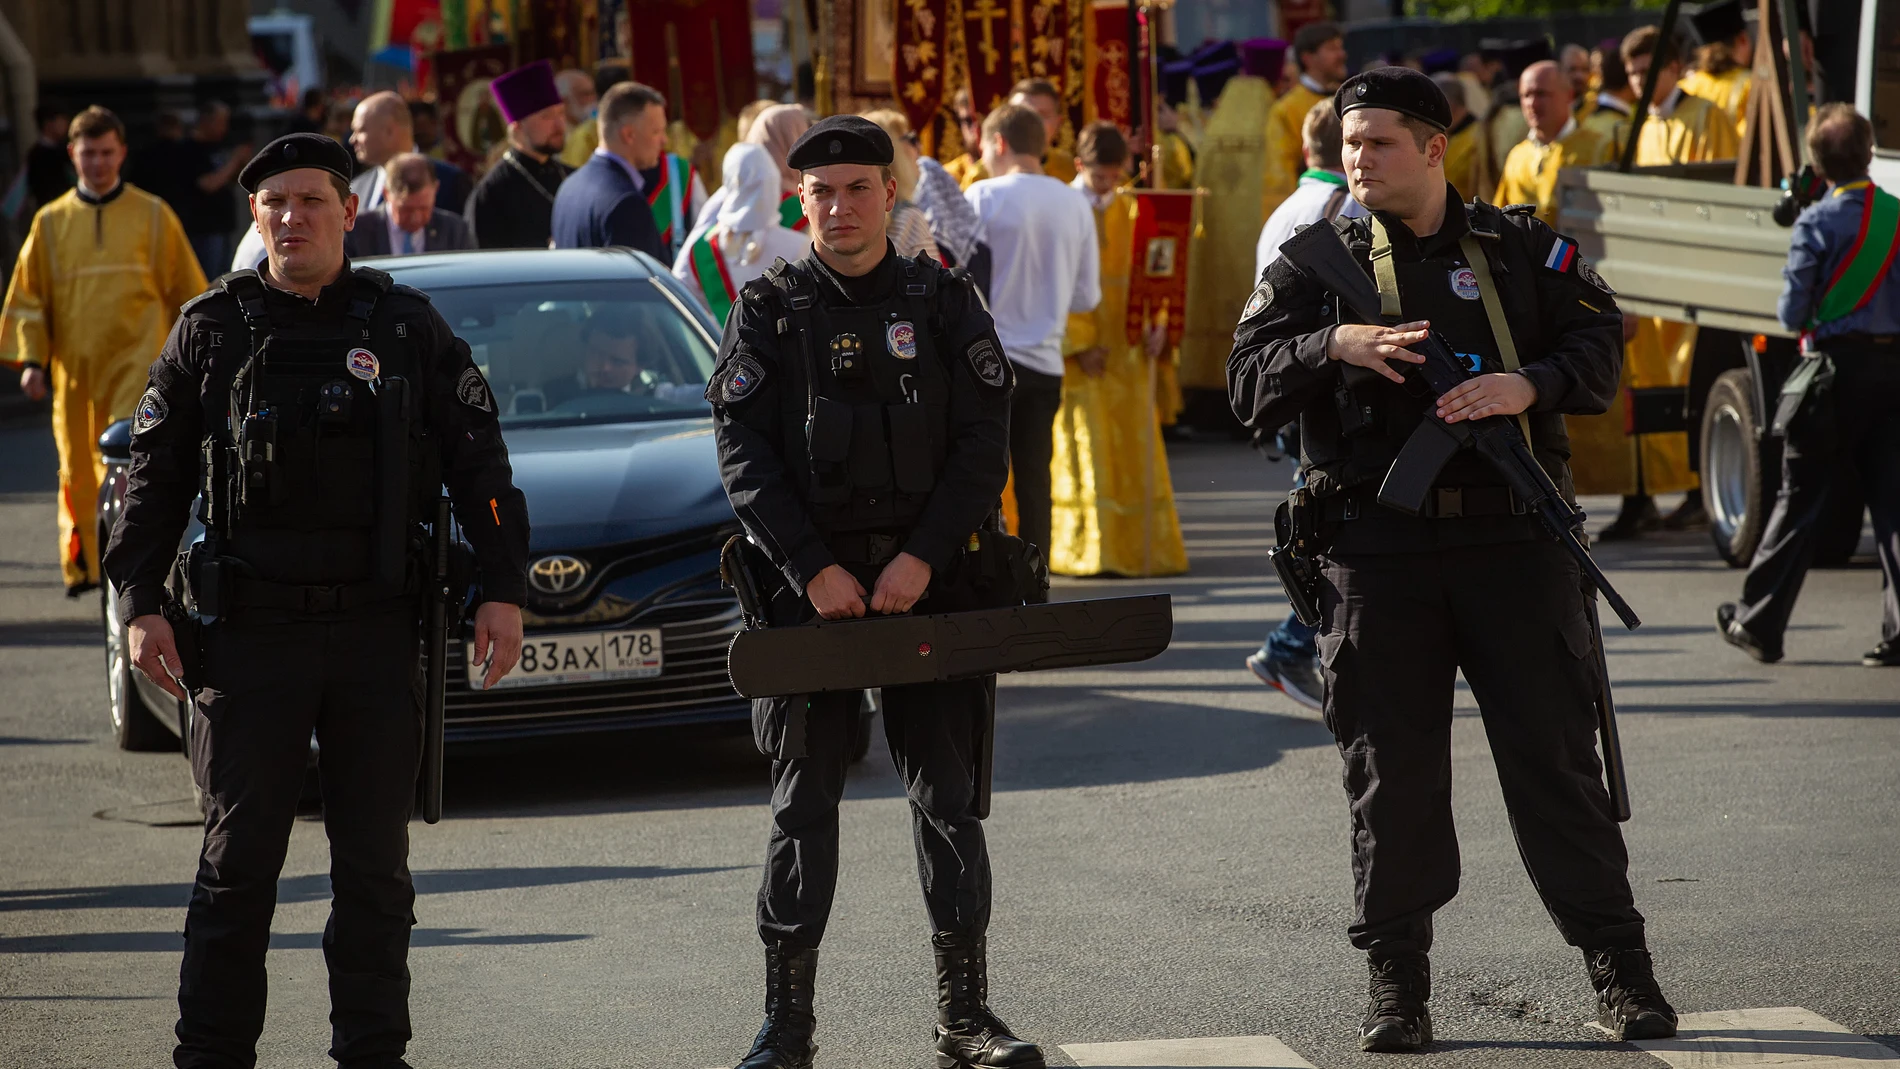 September 12, 2023, St. Petersburg, Russia: Police officers seen during the cordon off the central street of the city before the start of the procession along Nevsky Prospekt from the Kazan Cathedral. On September 12, a religious procession was held dedicated to the Day of Transferring the Relics of the Holy Blessed Prince Alexander Nevsky to St. Petersburg. A festive service was held under the leadership of Metropolitan Barsanuphius. Thousands of people carried the Kazan Icon of the Mother o...